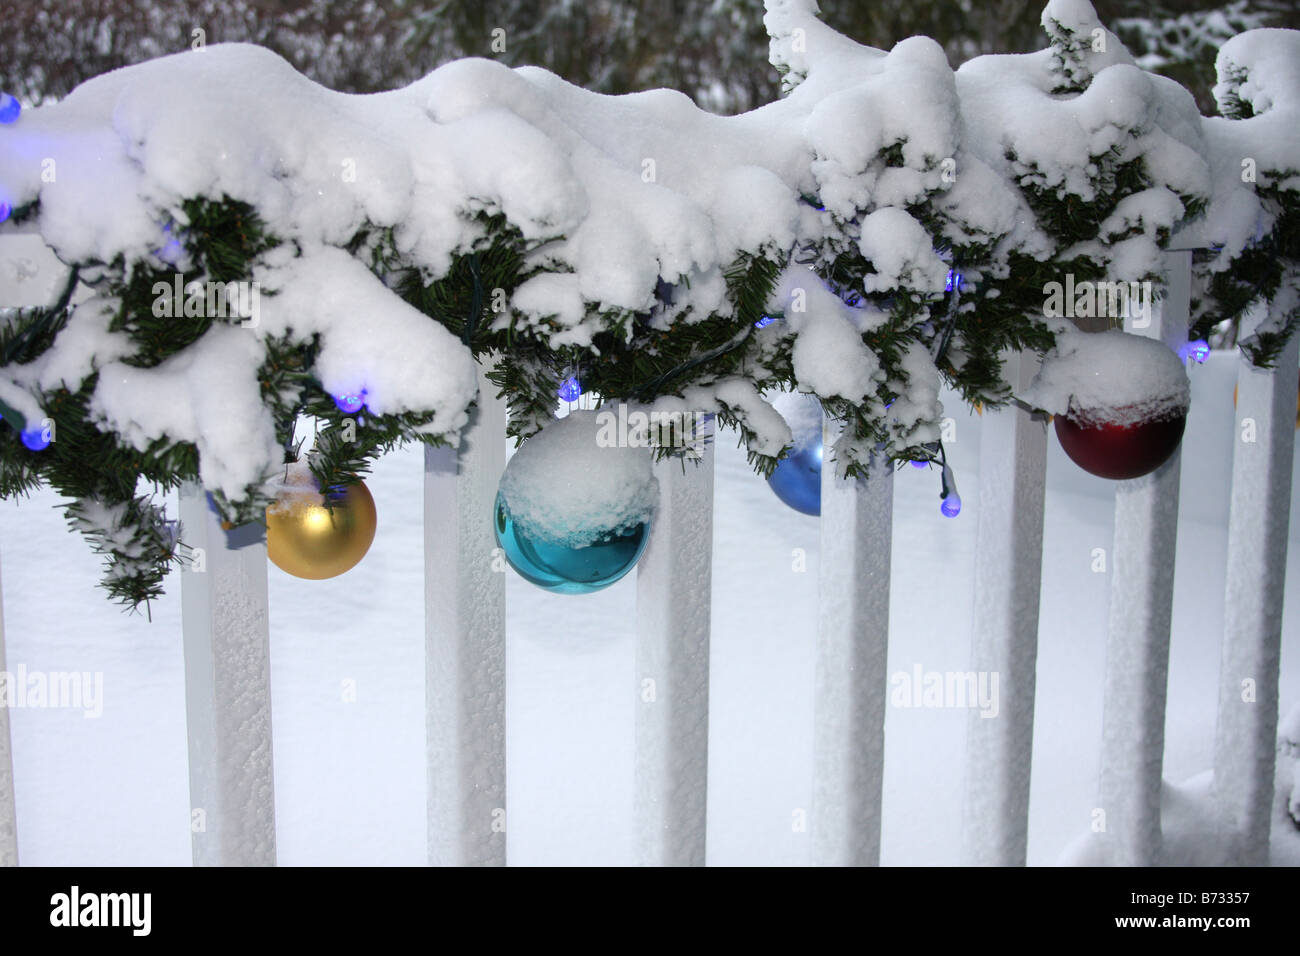 A porch with Christmas decorations lights and ornaments covered in snow Stock Photo